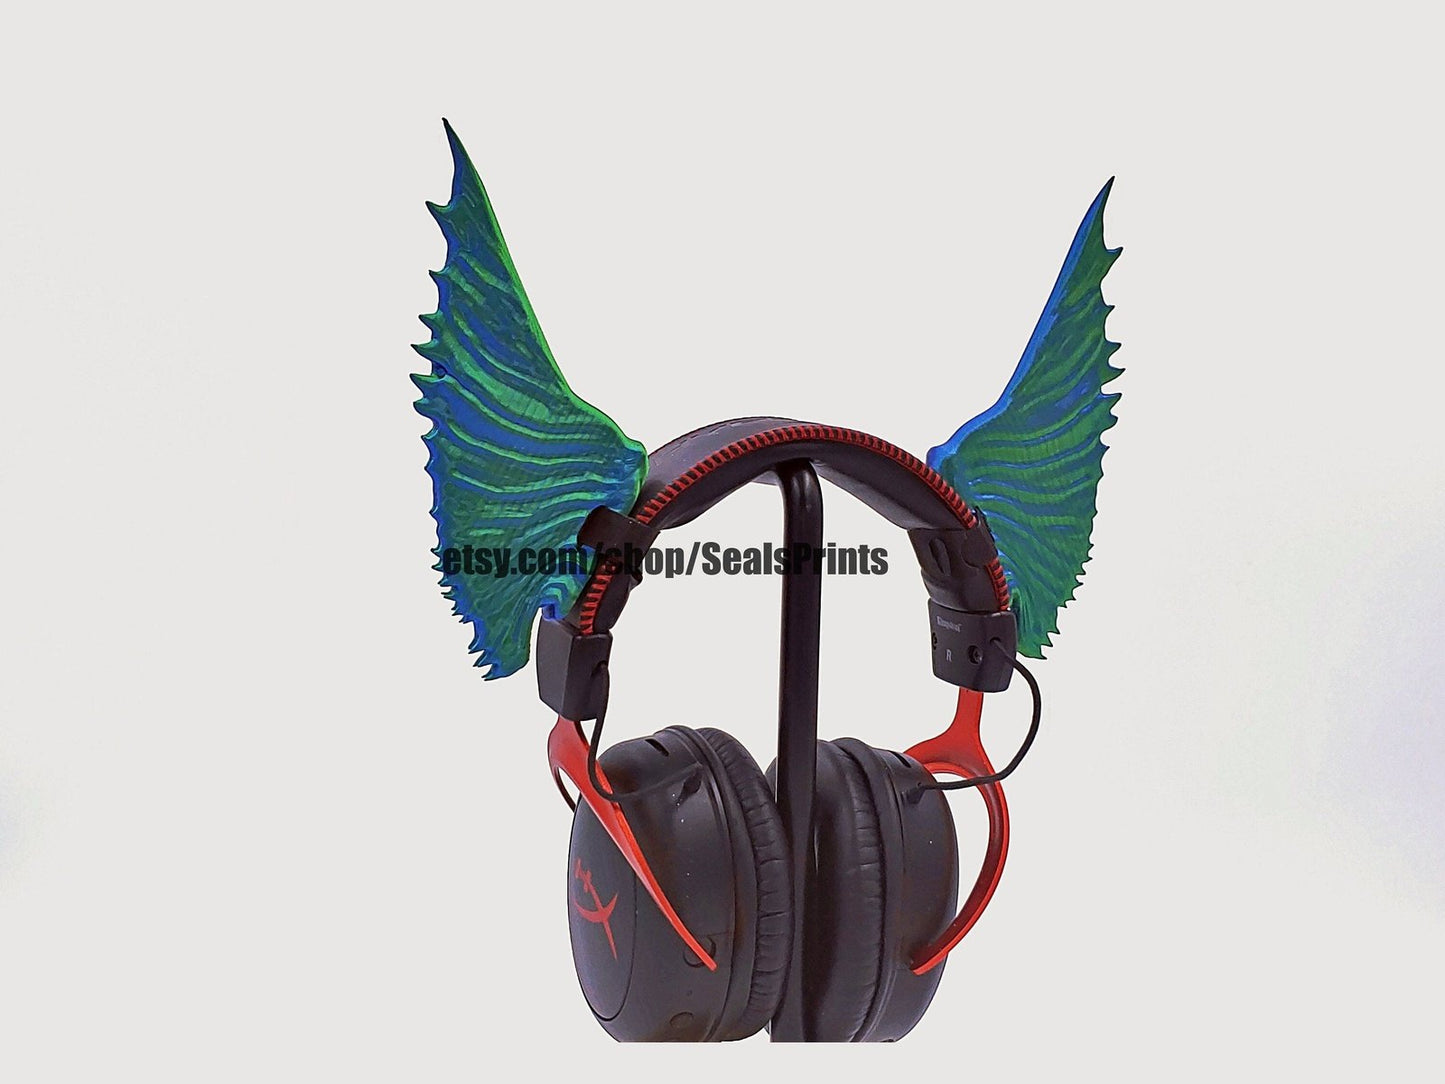 Siren Frills/ Mermaid Fins Attachment for Headset, Gaming and Streaming Headset Accessories, cosplay, Streaming Prop, gaming streamer gift